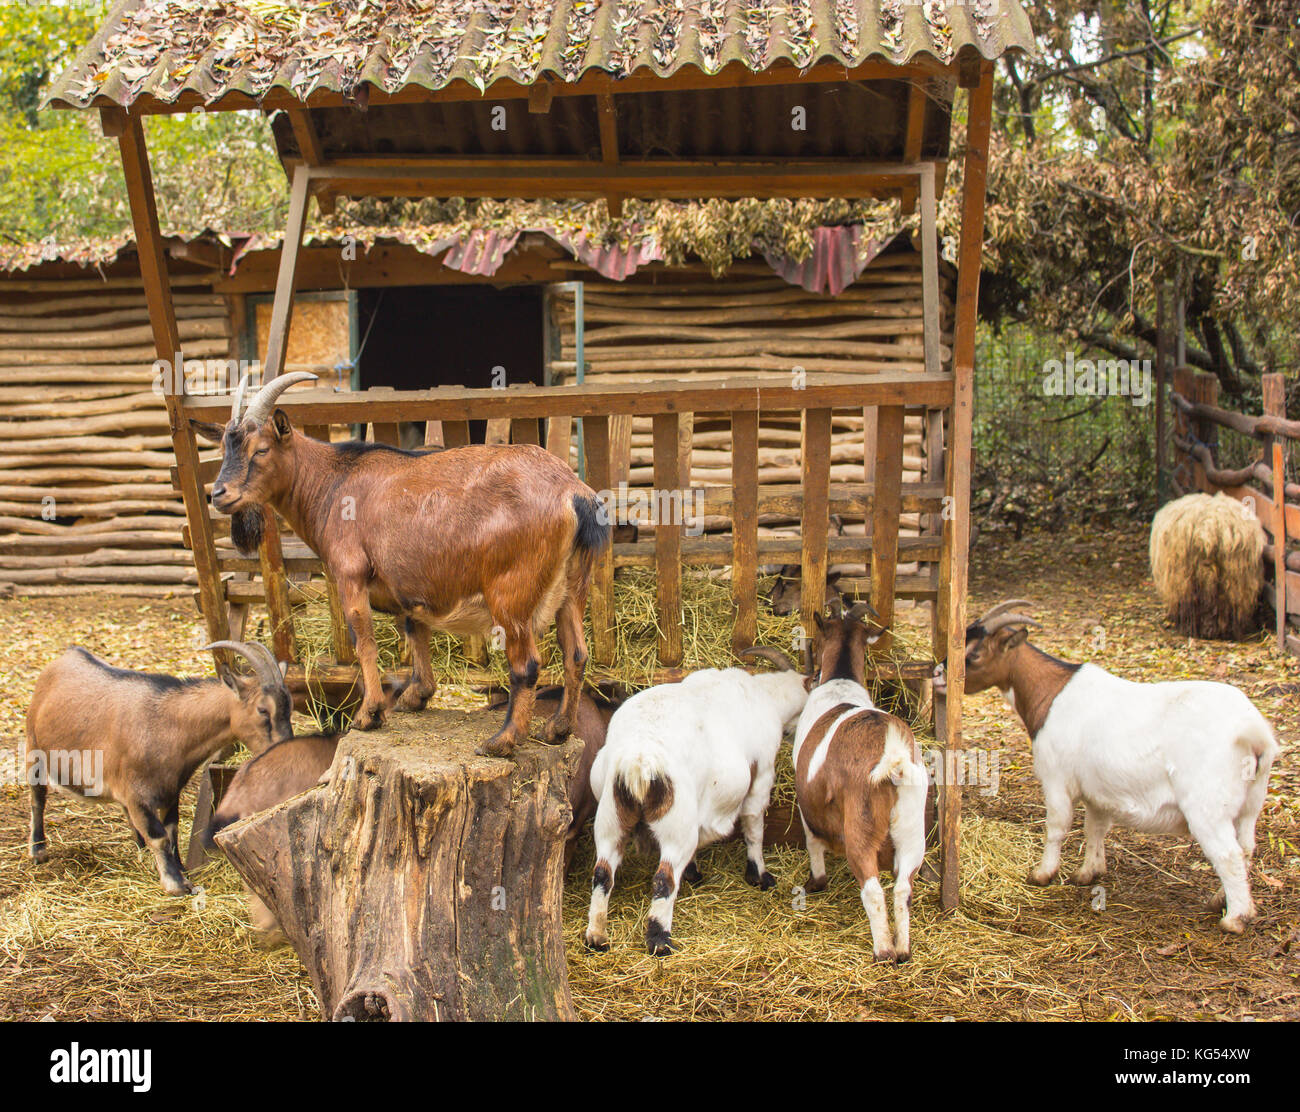 a herd of goats in a pen with a leader the rest goats eat, goats of different colors and colorings, the leader protects the herd Stock Photo